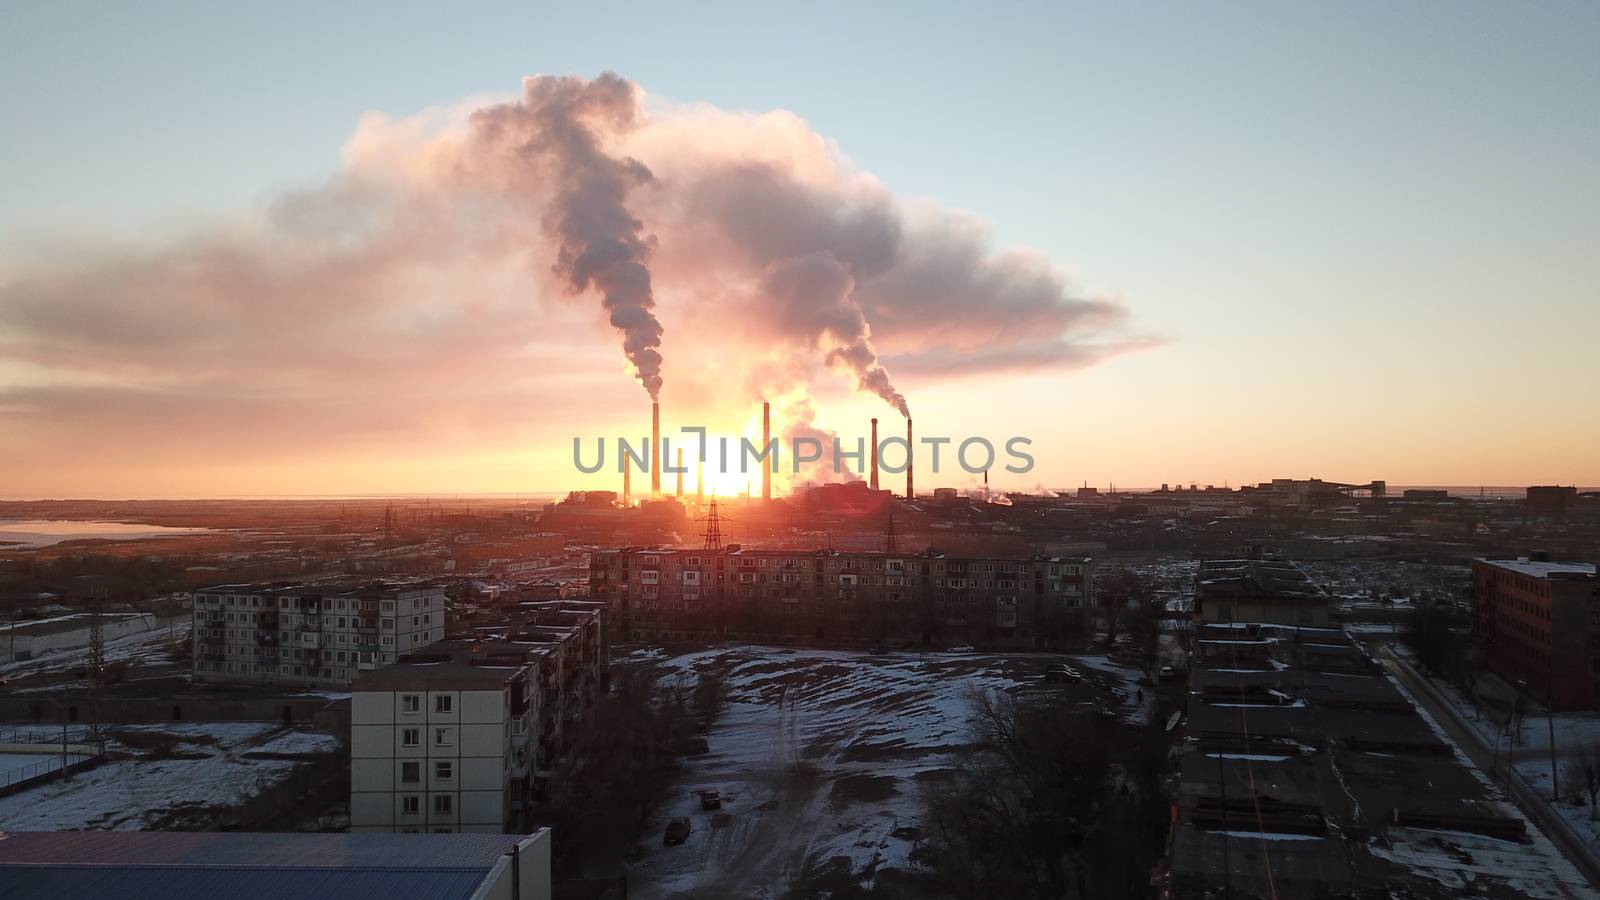 An epic sunset and a Smoking factory. by Passcal